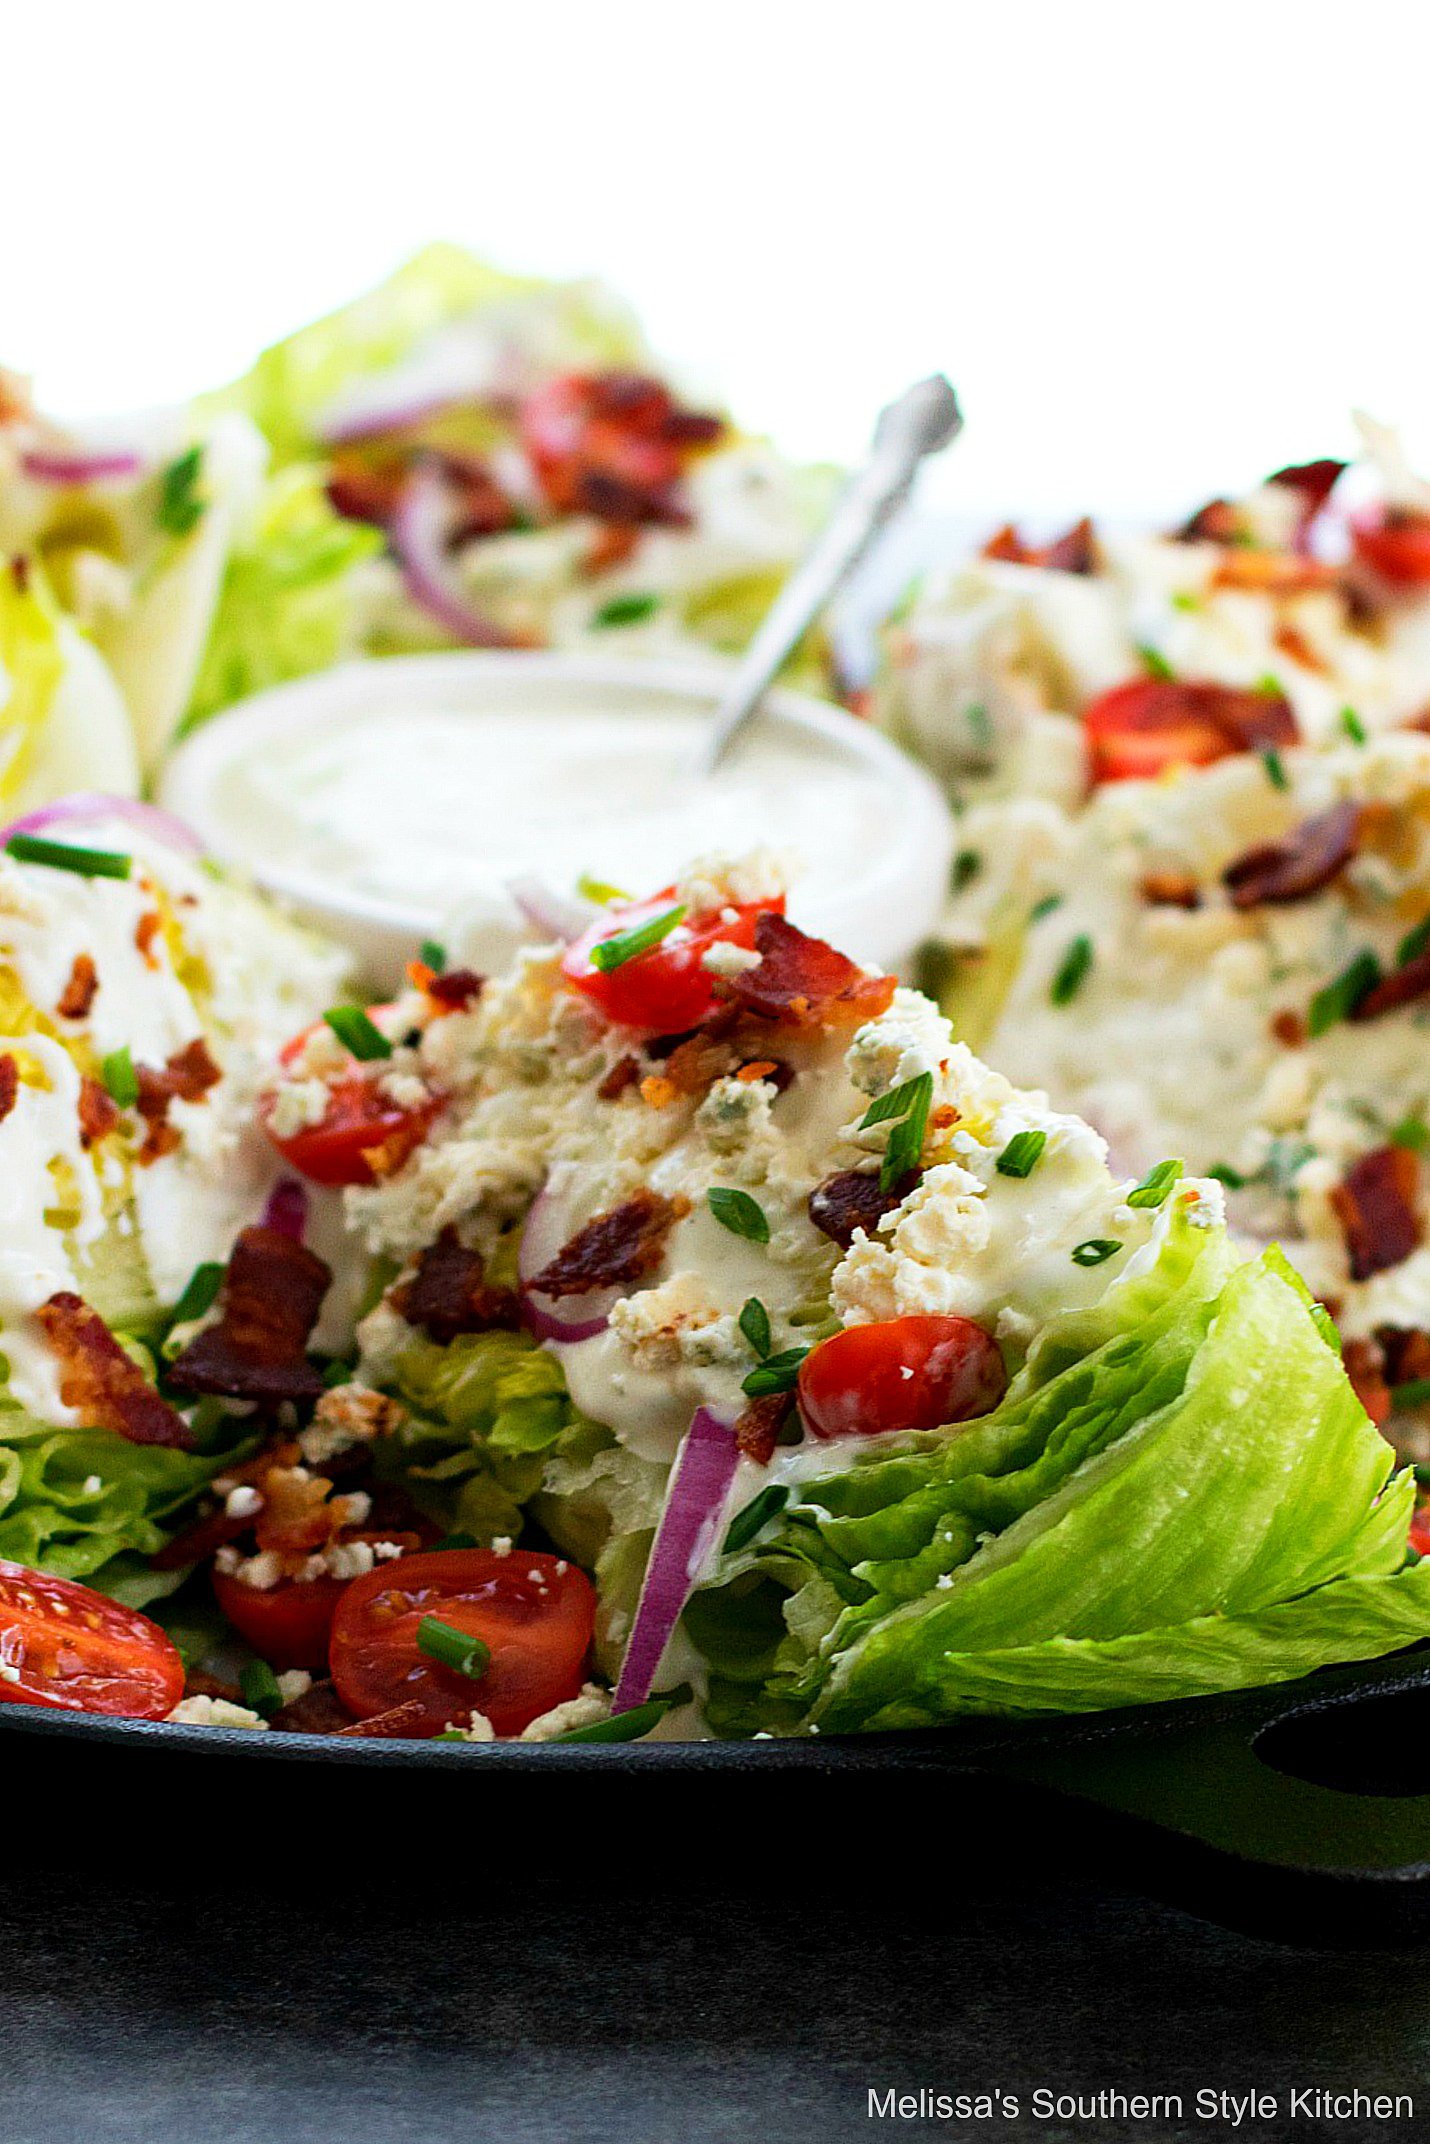 Classic Wedge Salad with bleu cheese dressing 